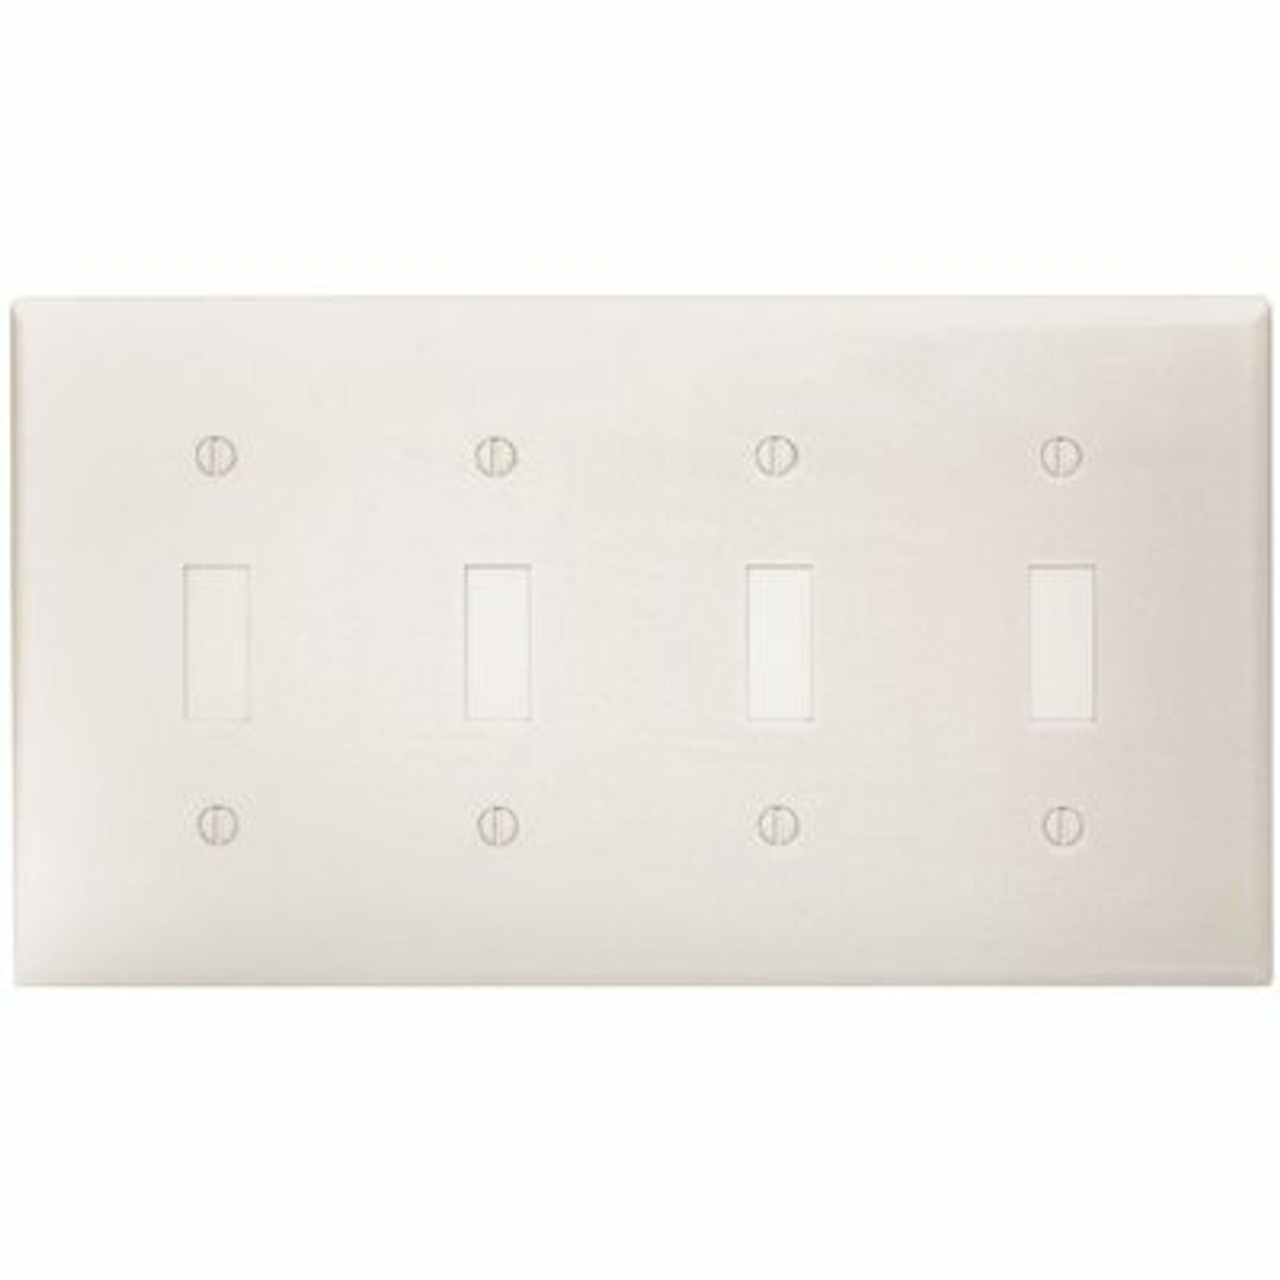 Leviton White 4-Gang Toggle Wall Plate (1-Pack) - 609015